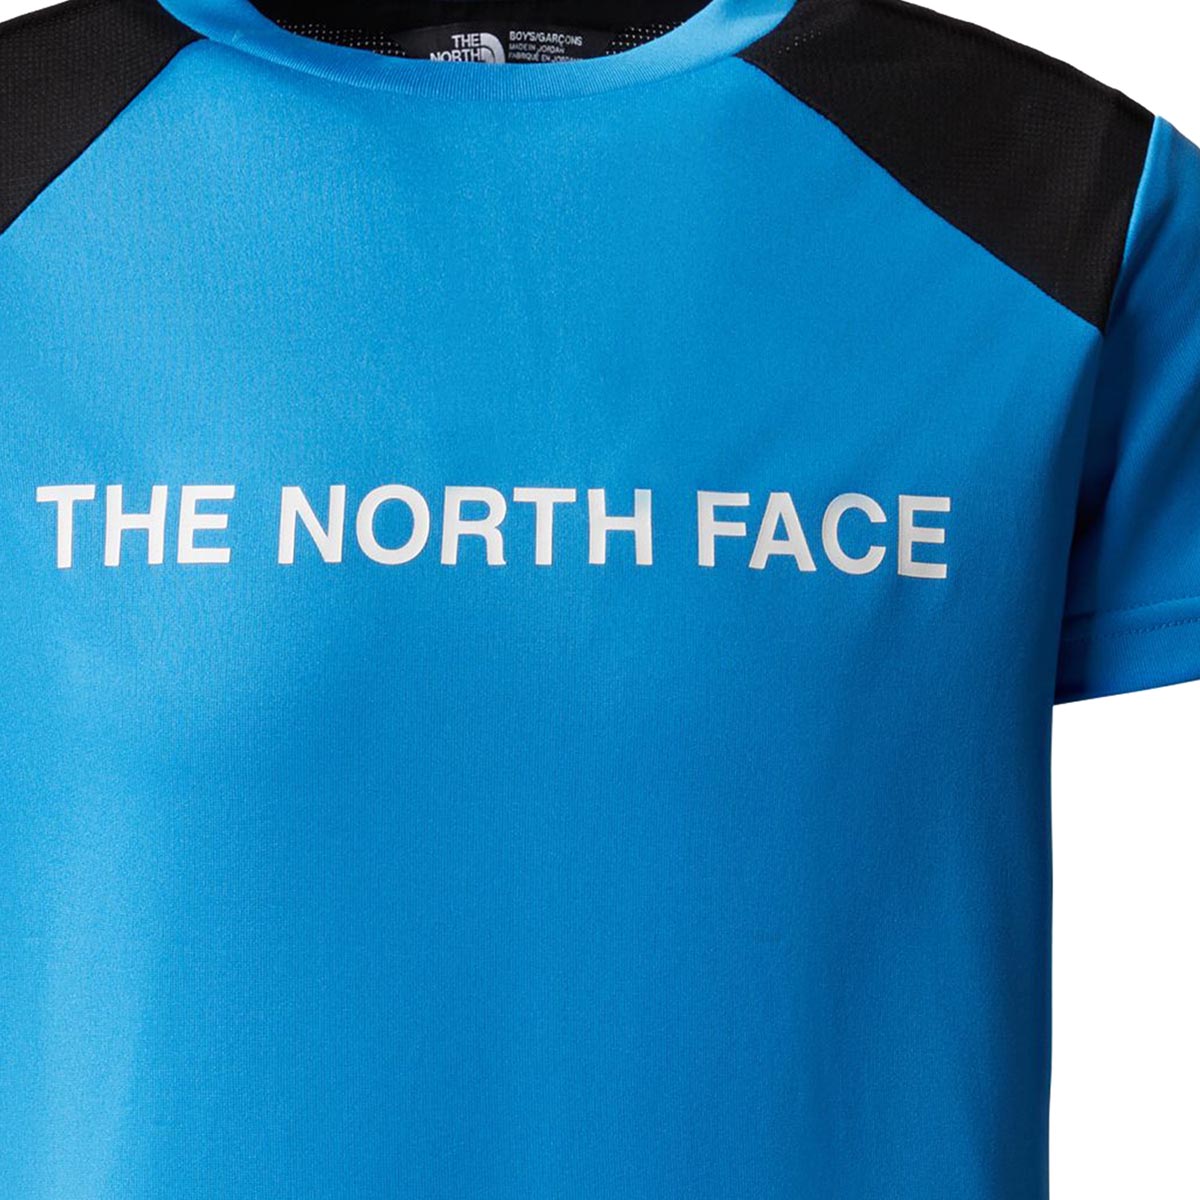 THE NORTH FACE - NEVER STOP T-SHIRT